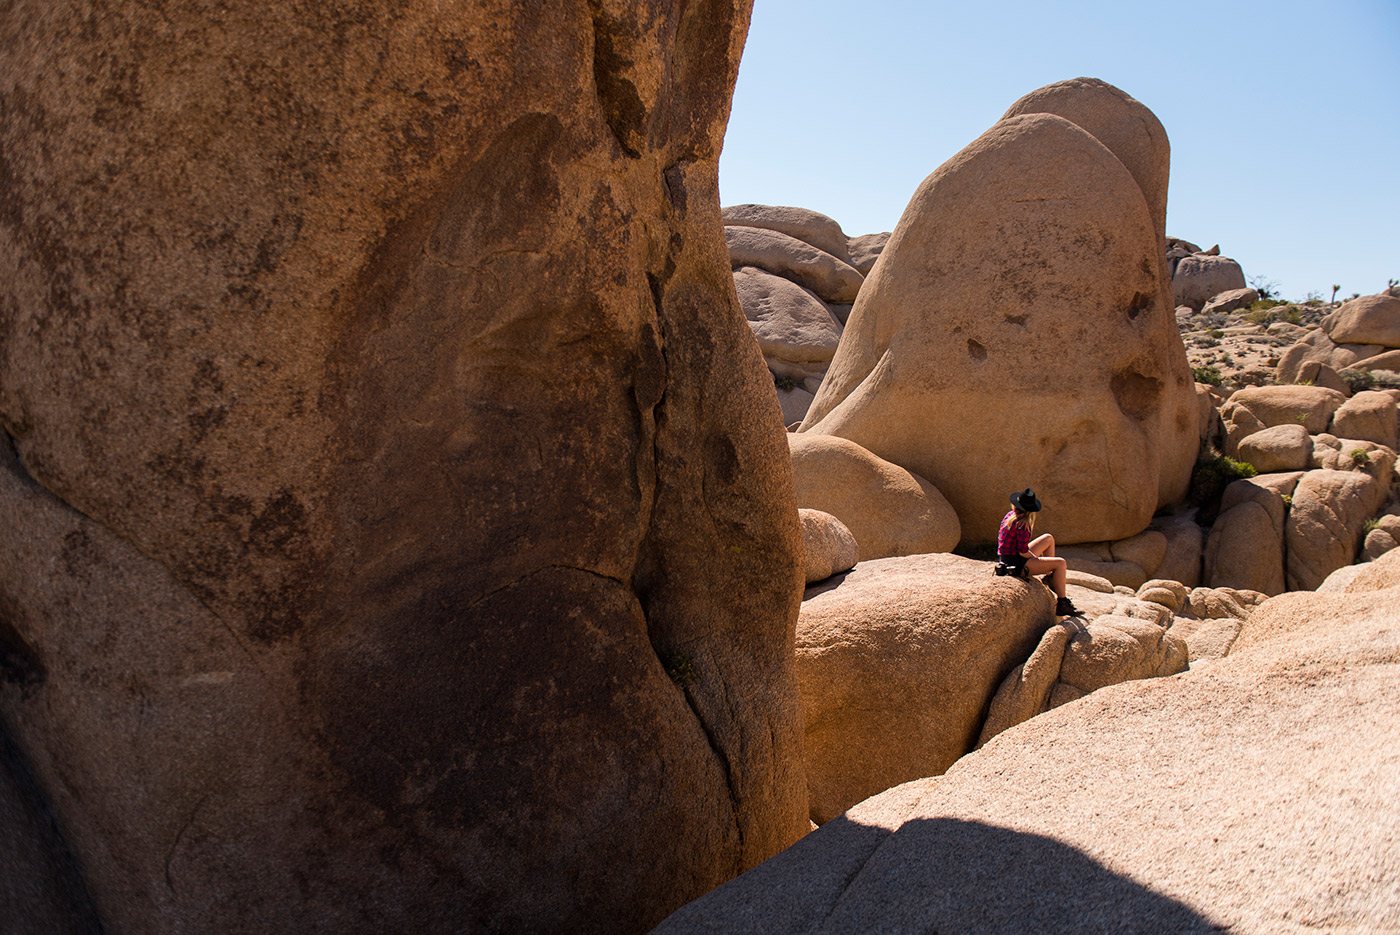 Camping Joshua Tree California Here S Your 5 Step Guide To High Desert Greatness